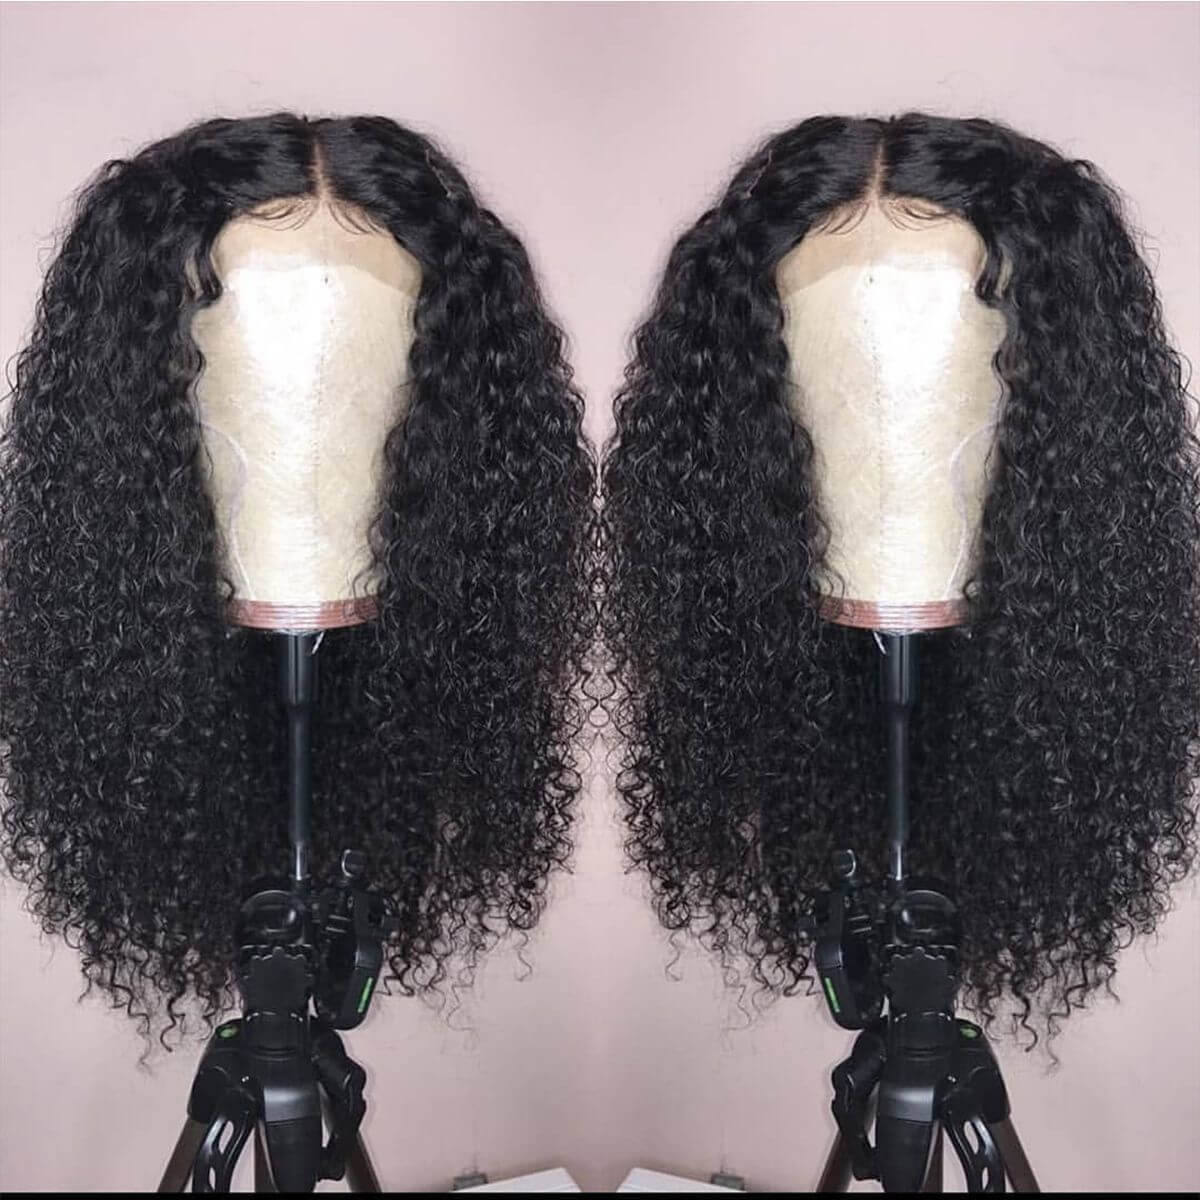 curly hair full lace wig,curly hair full wig,full lace curly wig,curly full lace wig,water full lace human wig,lace full curly hair wig